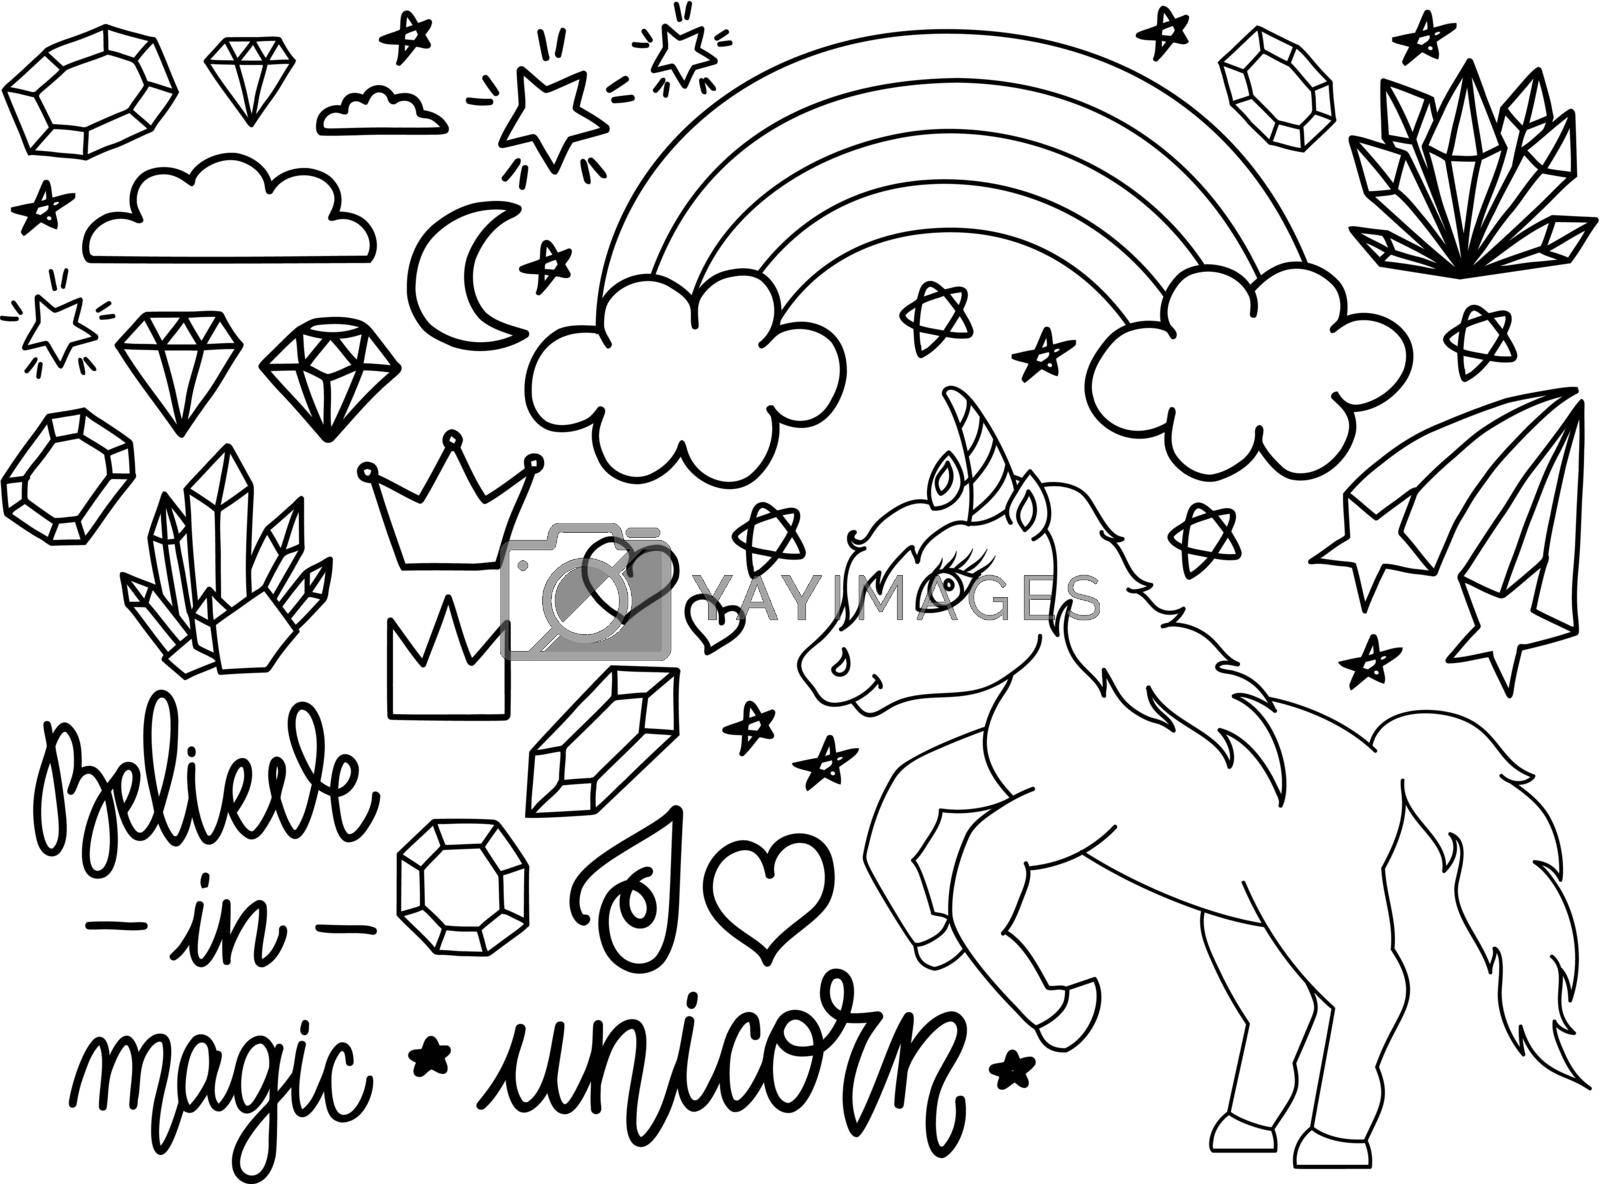 Royalty free image of Hand drawn unicorn and other elements. Set of outline vector illustrations in doodle or cartoon style for coloring books and much more by Marin4ik